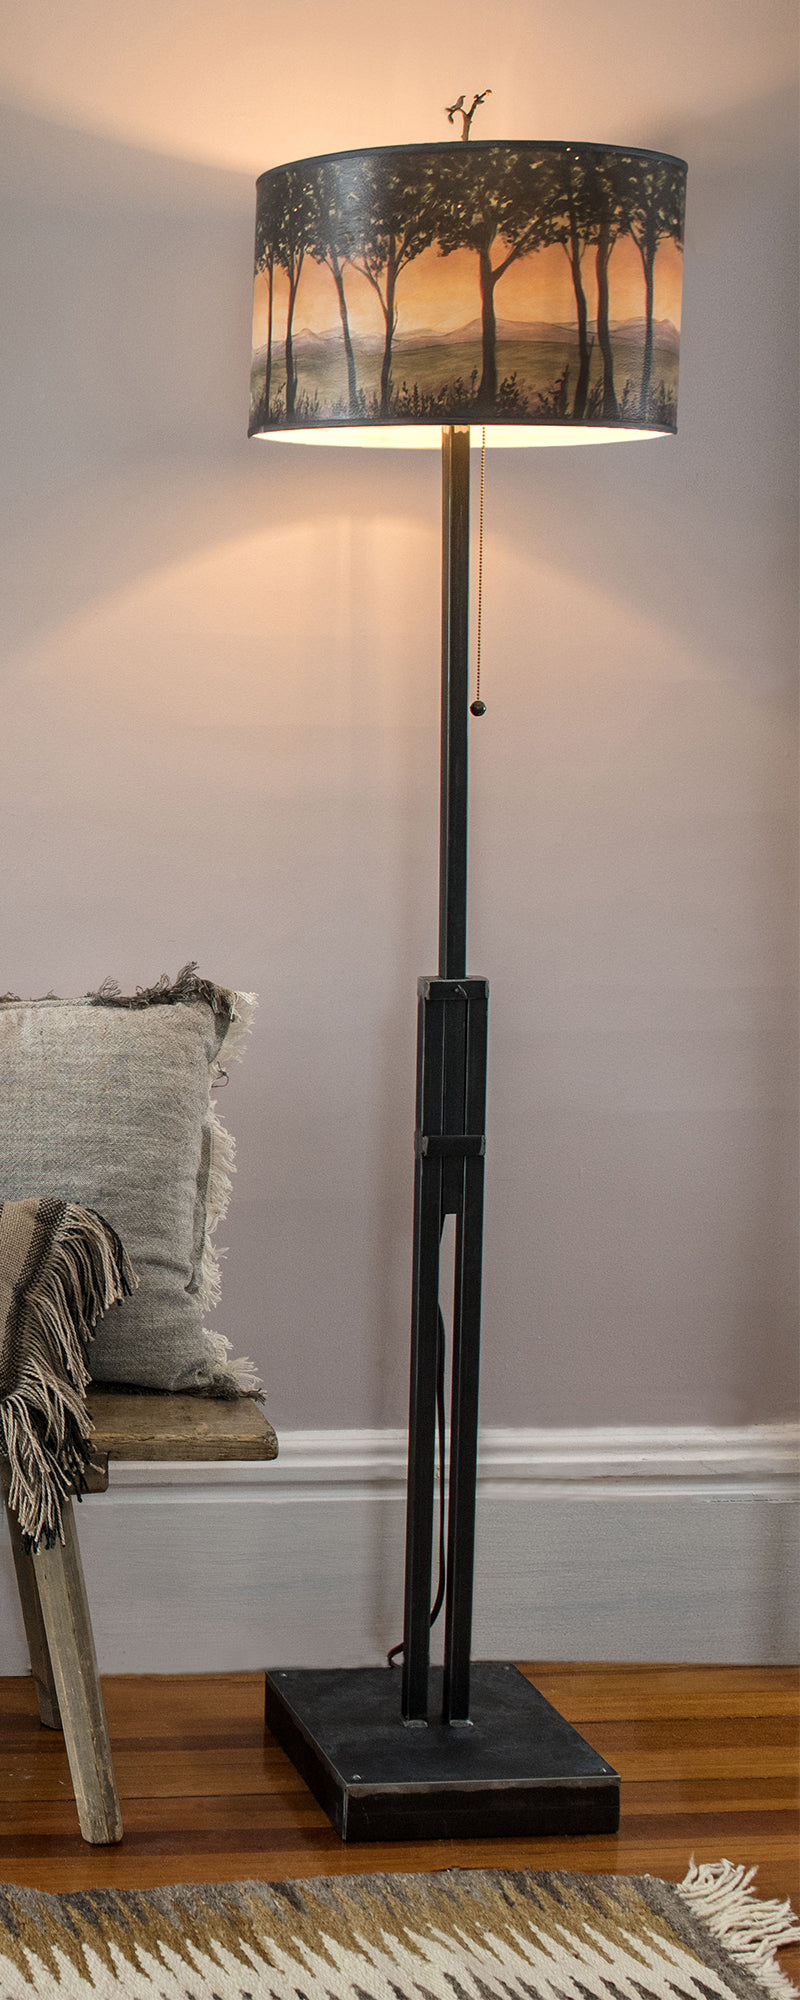 Adjustable-Height Steel Floor Lamp with Large Drum Shade in Dawn